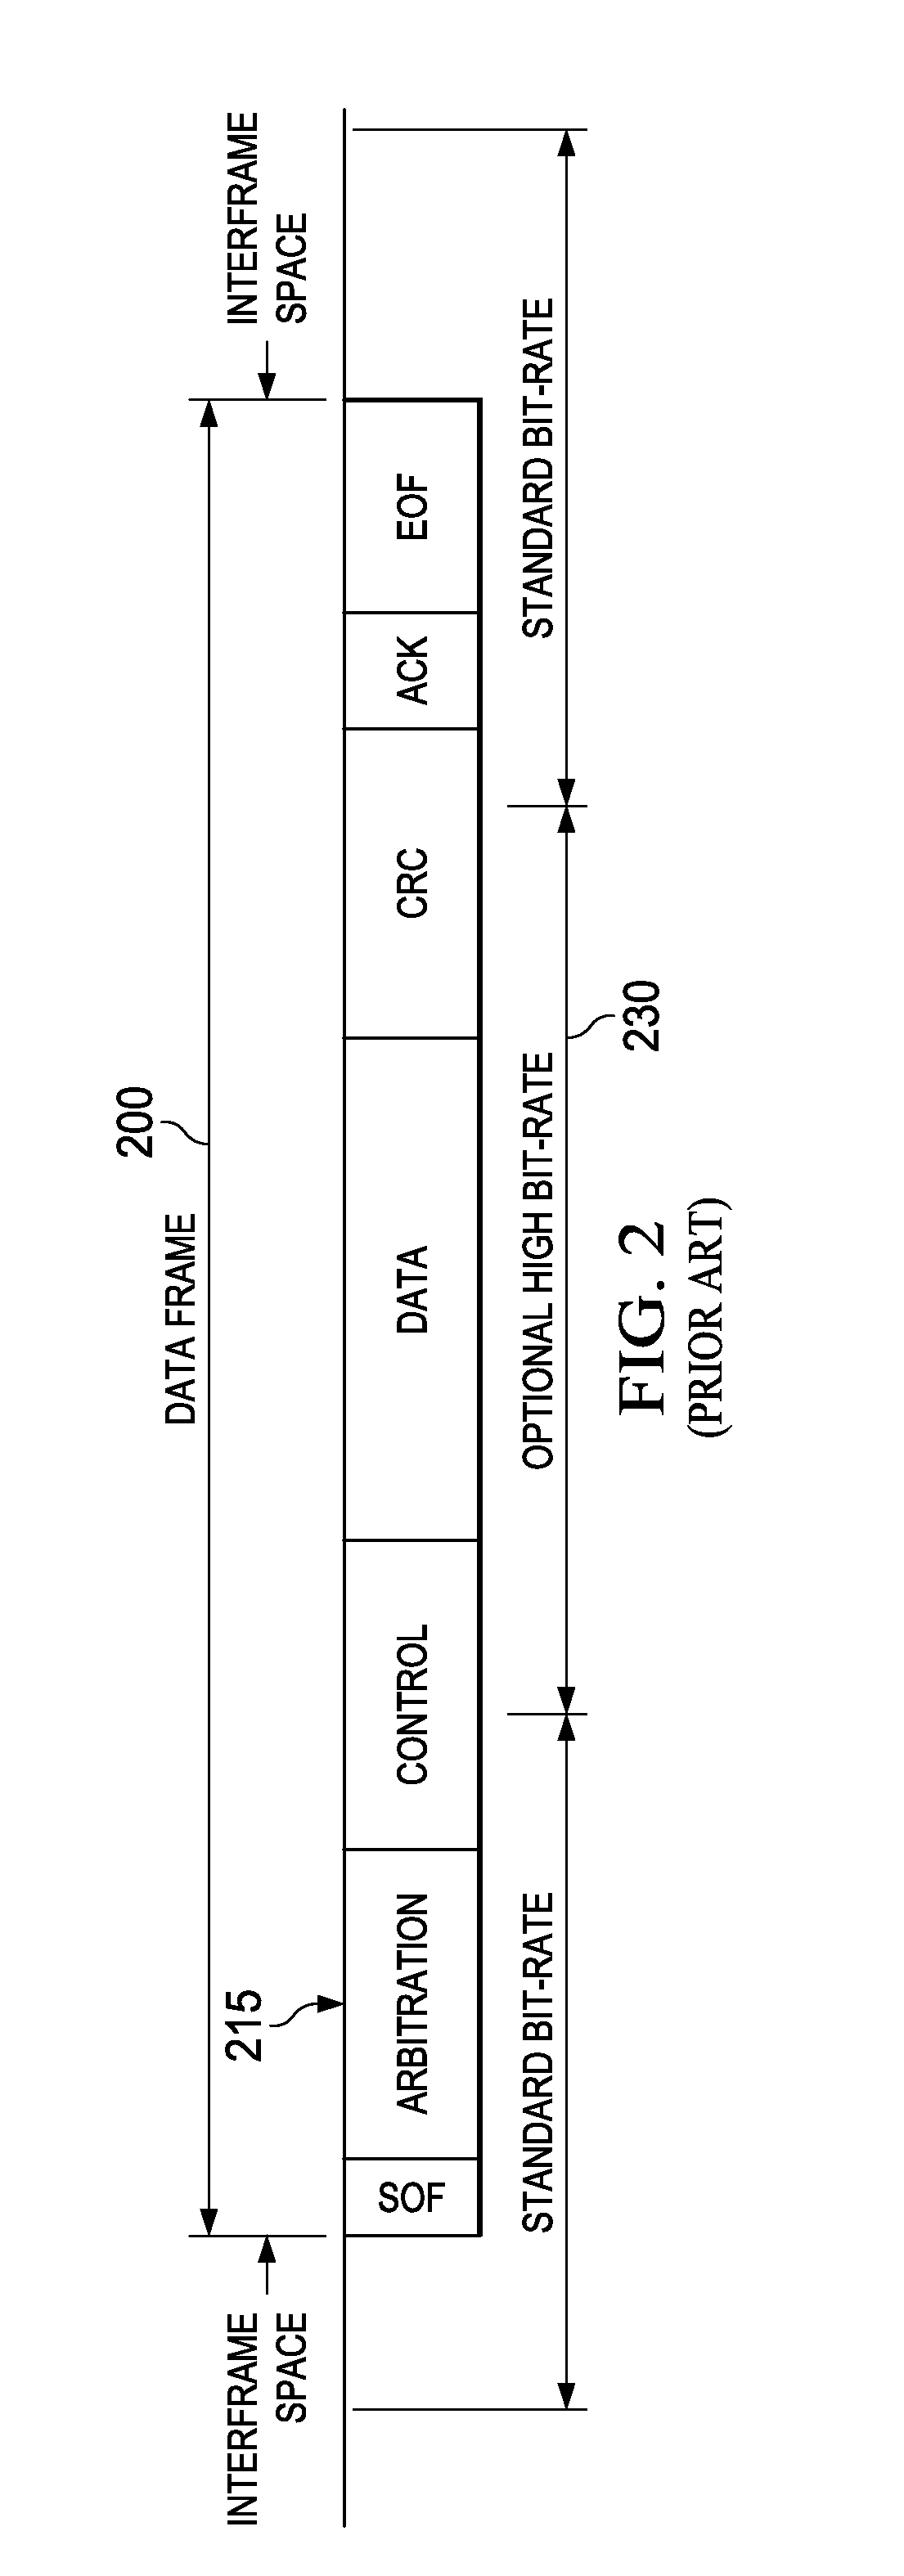 Can bus edge timing control apparatus, systems and methods